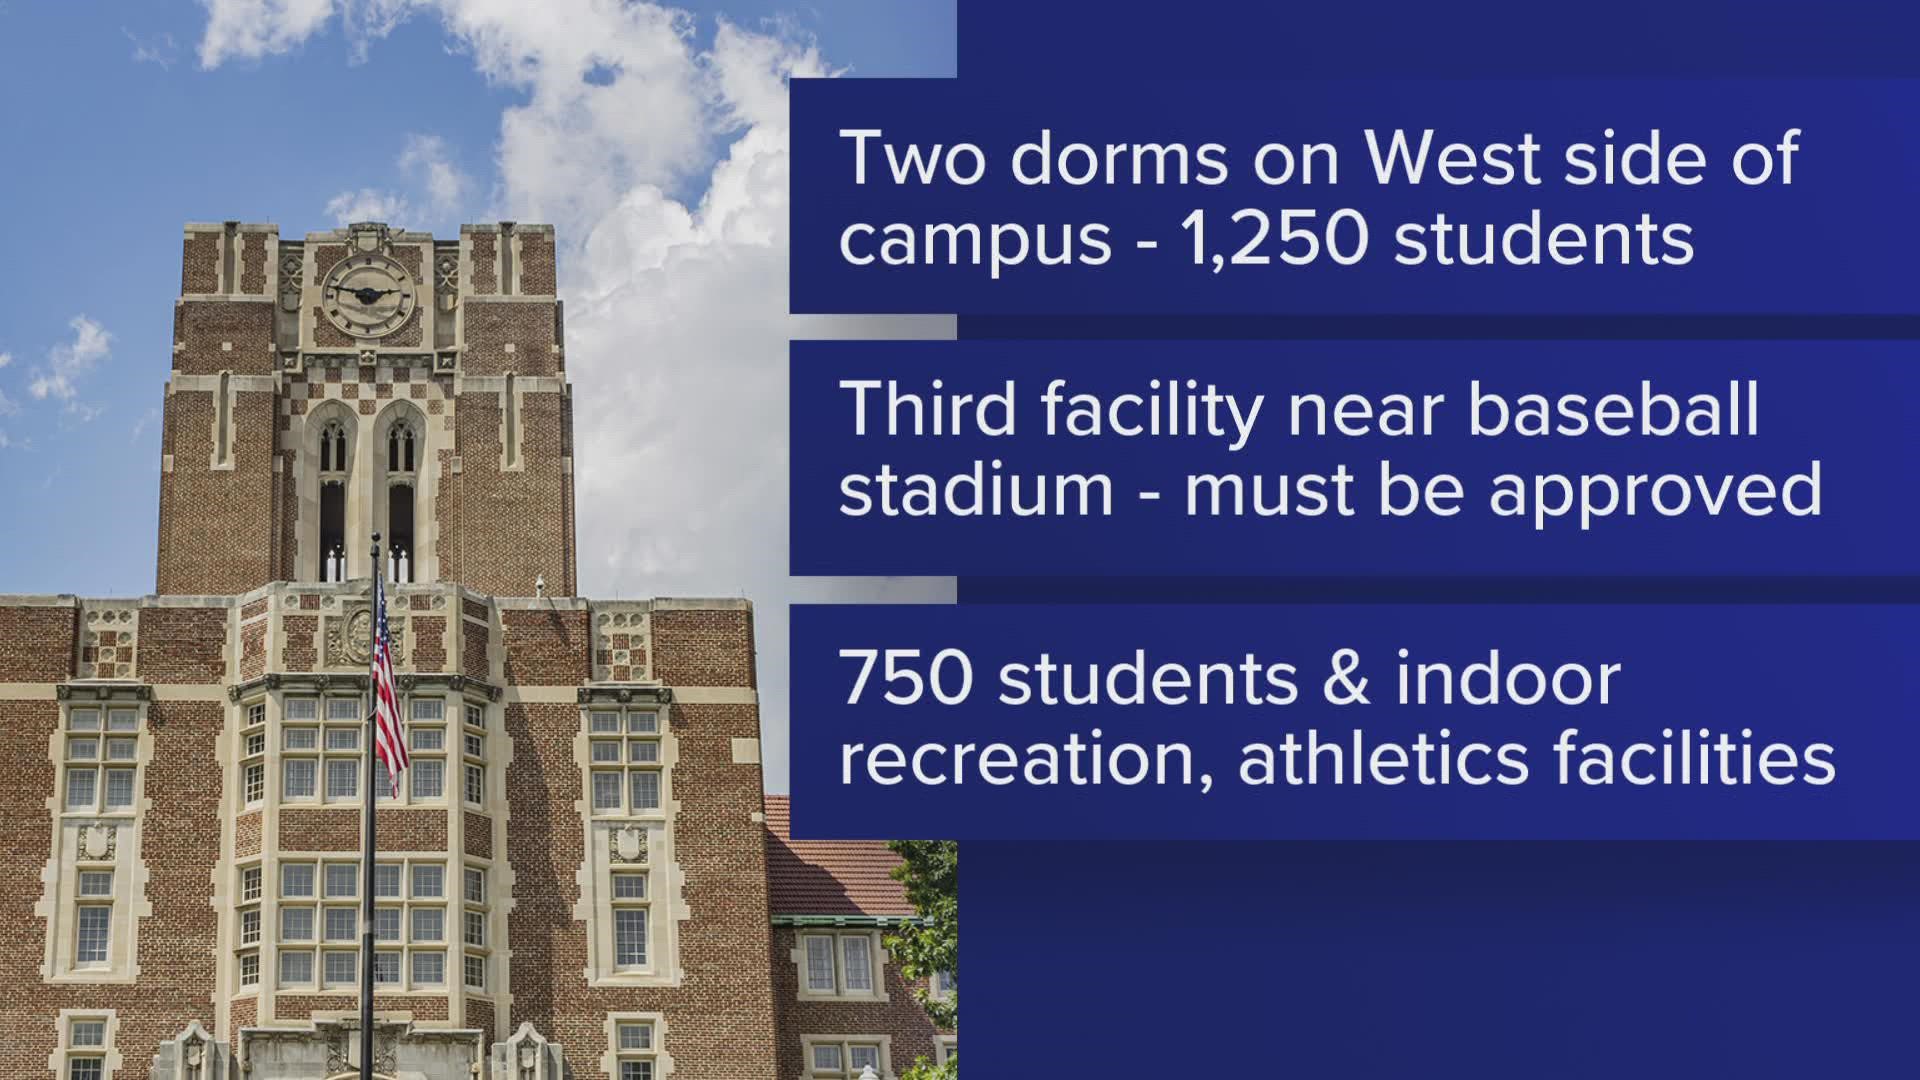 The projects include a new student success building in place of Melrose Hall, a new theatre and improvements to Lindsey Nelson Stadium.